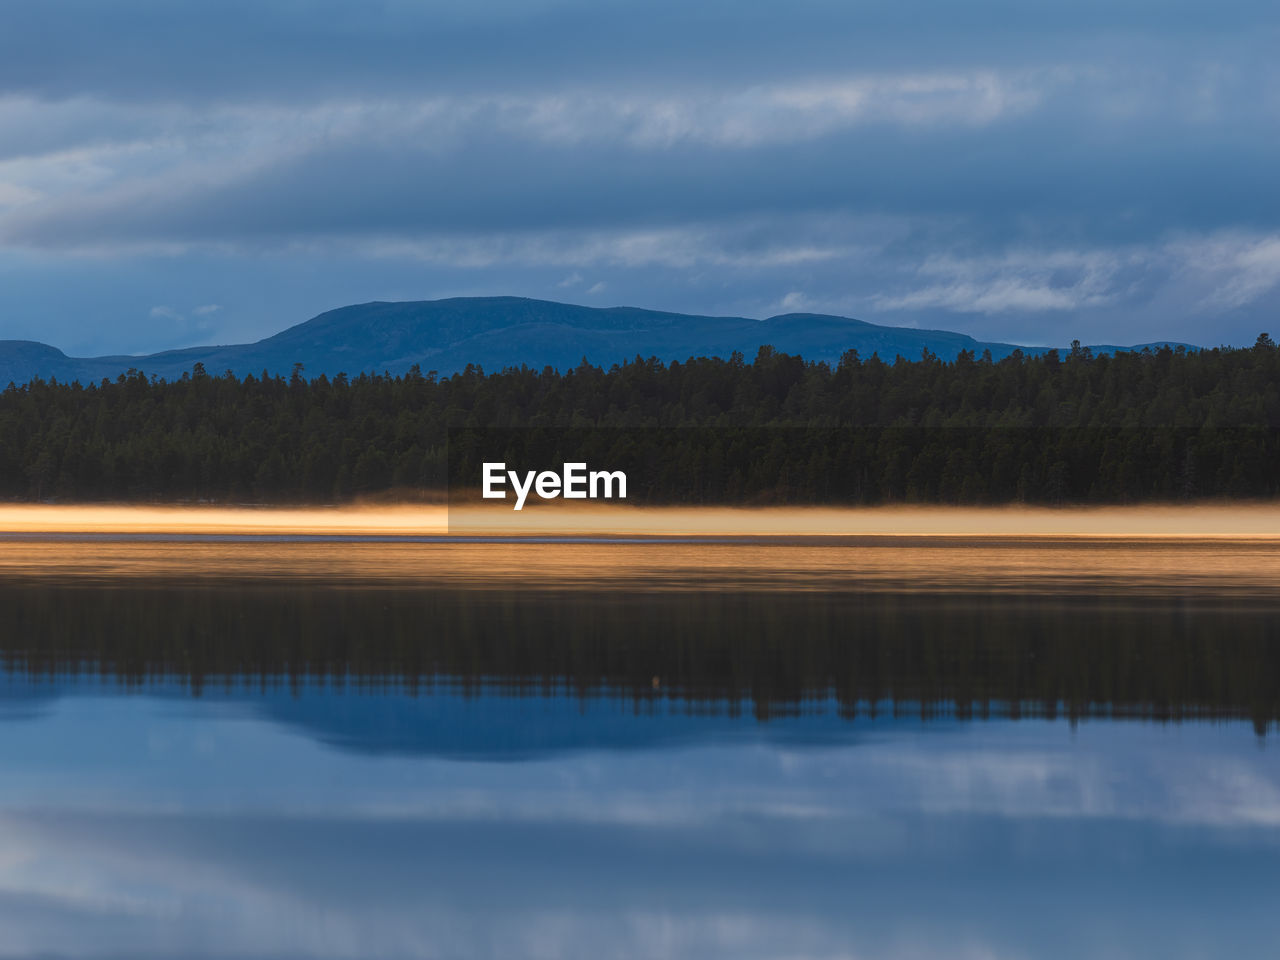 A tranquil dawn illuminates a lake in norway, its reflection shimmering beneath the morning mist. 